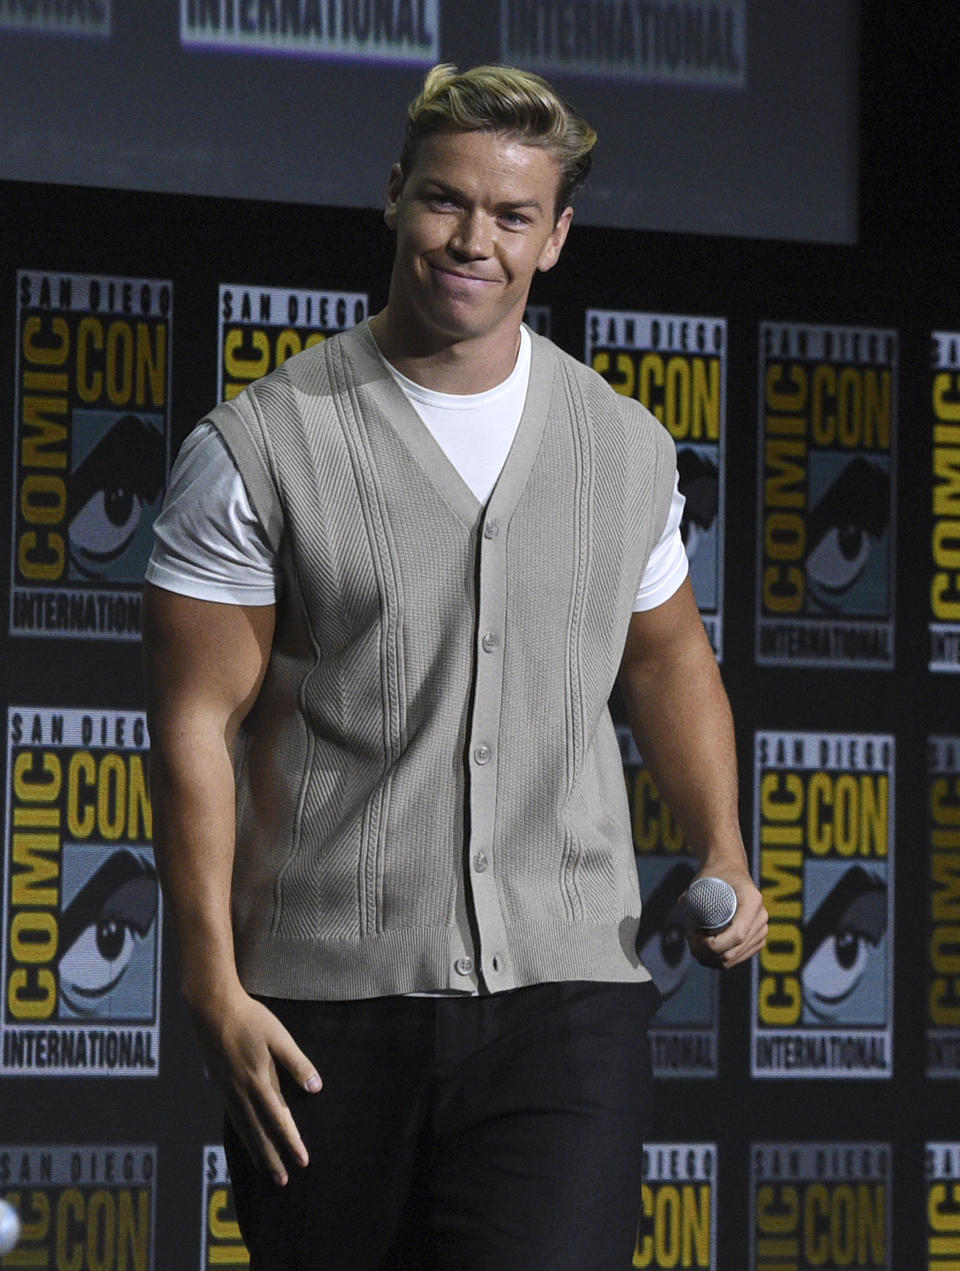 Will Poulter attends a panel for Marvel Studios on day three of Comic-Con International on Saturday, July 23, 2022, in San Diego. (Photo by Richard Shotwell/Invision/AP)